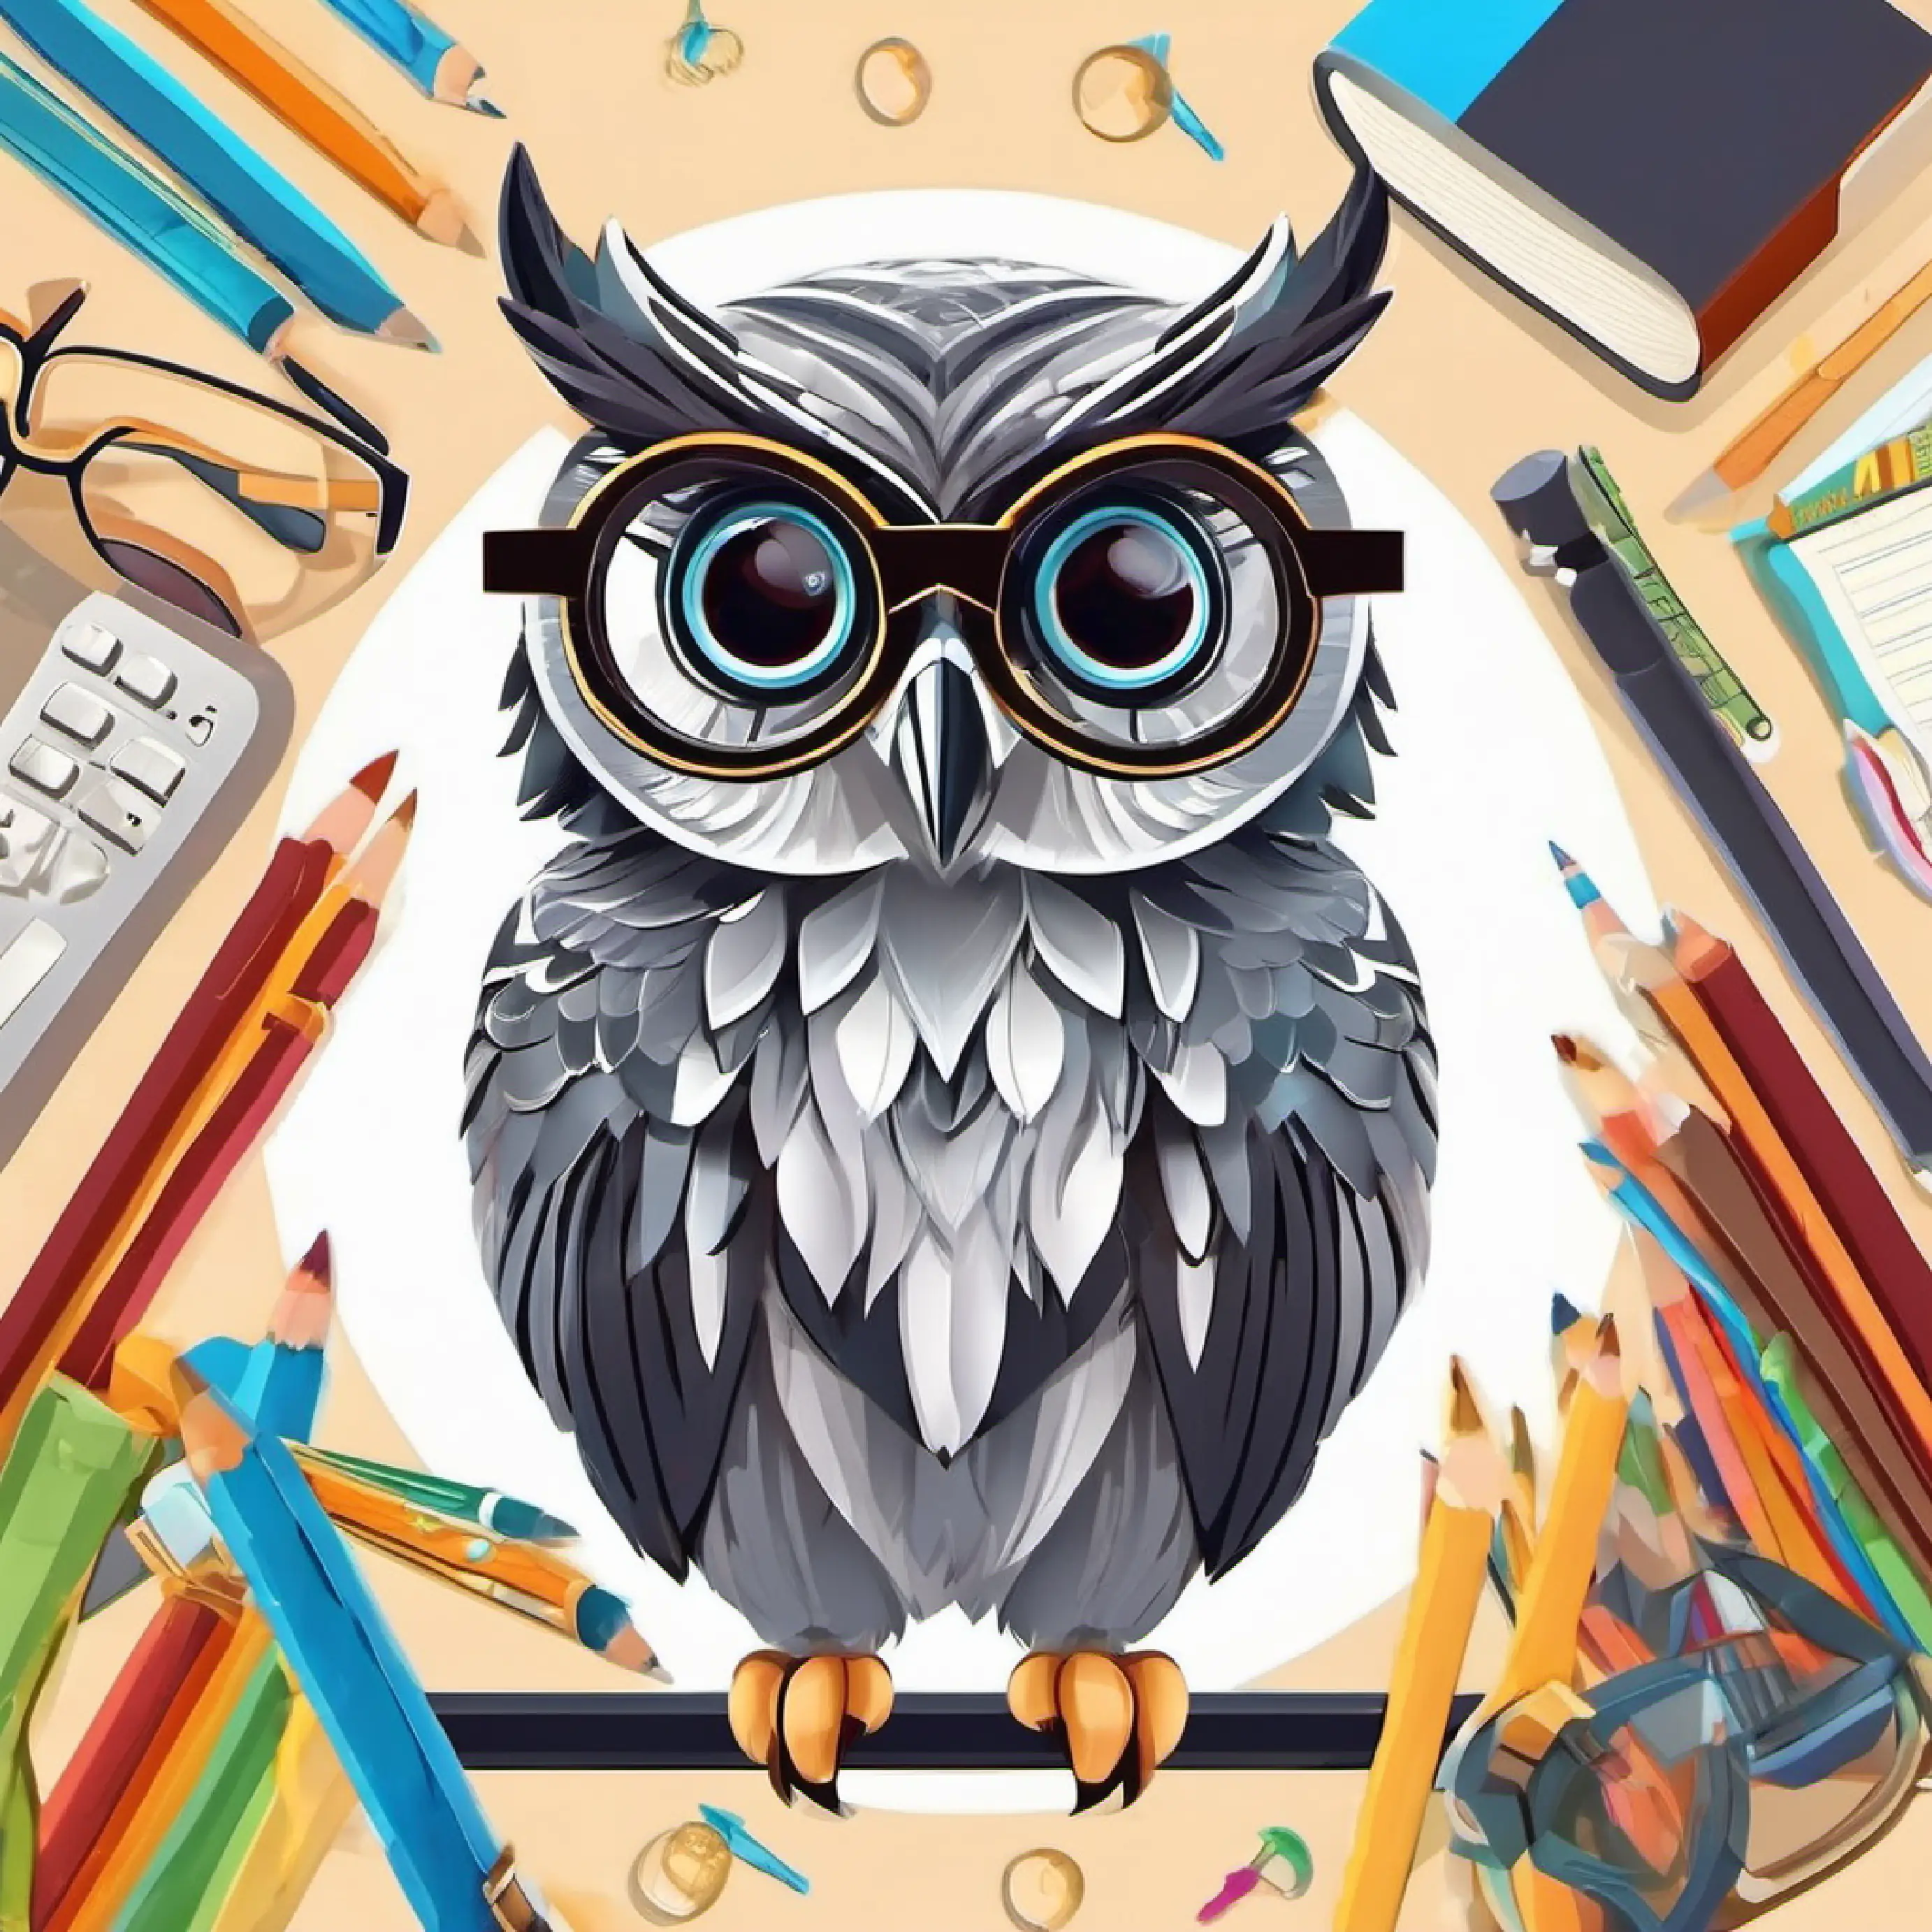 Owl teacher Grey feathers, large round glasses, wise eyes greets everyone warmly at school.